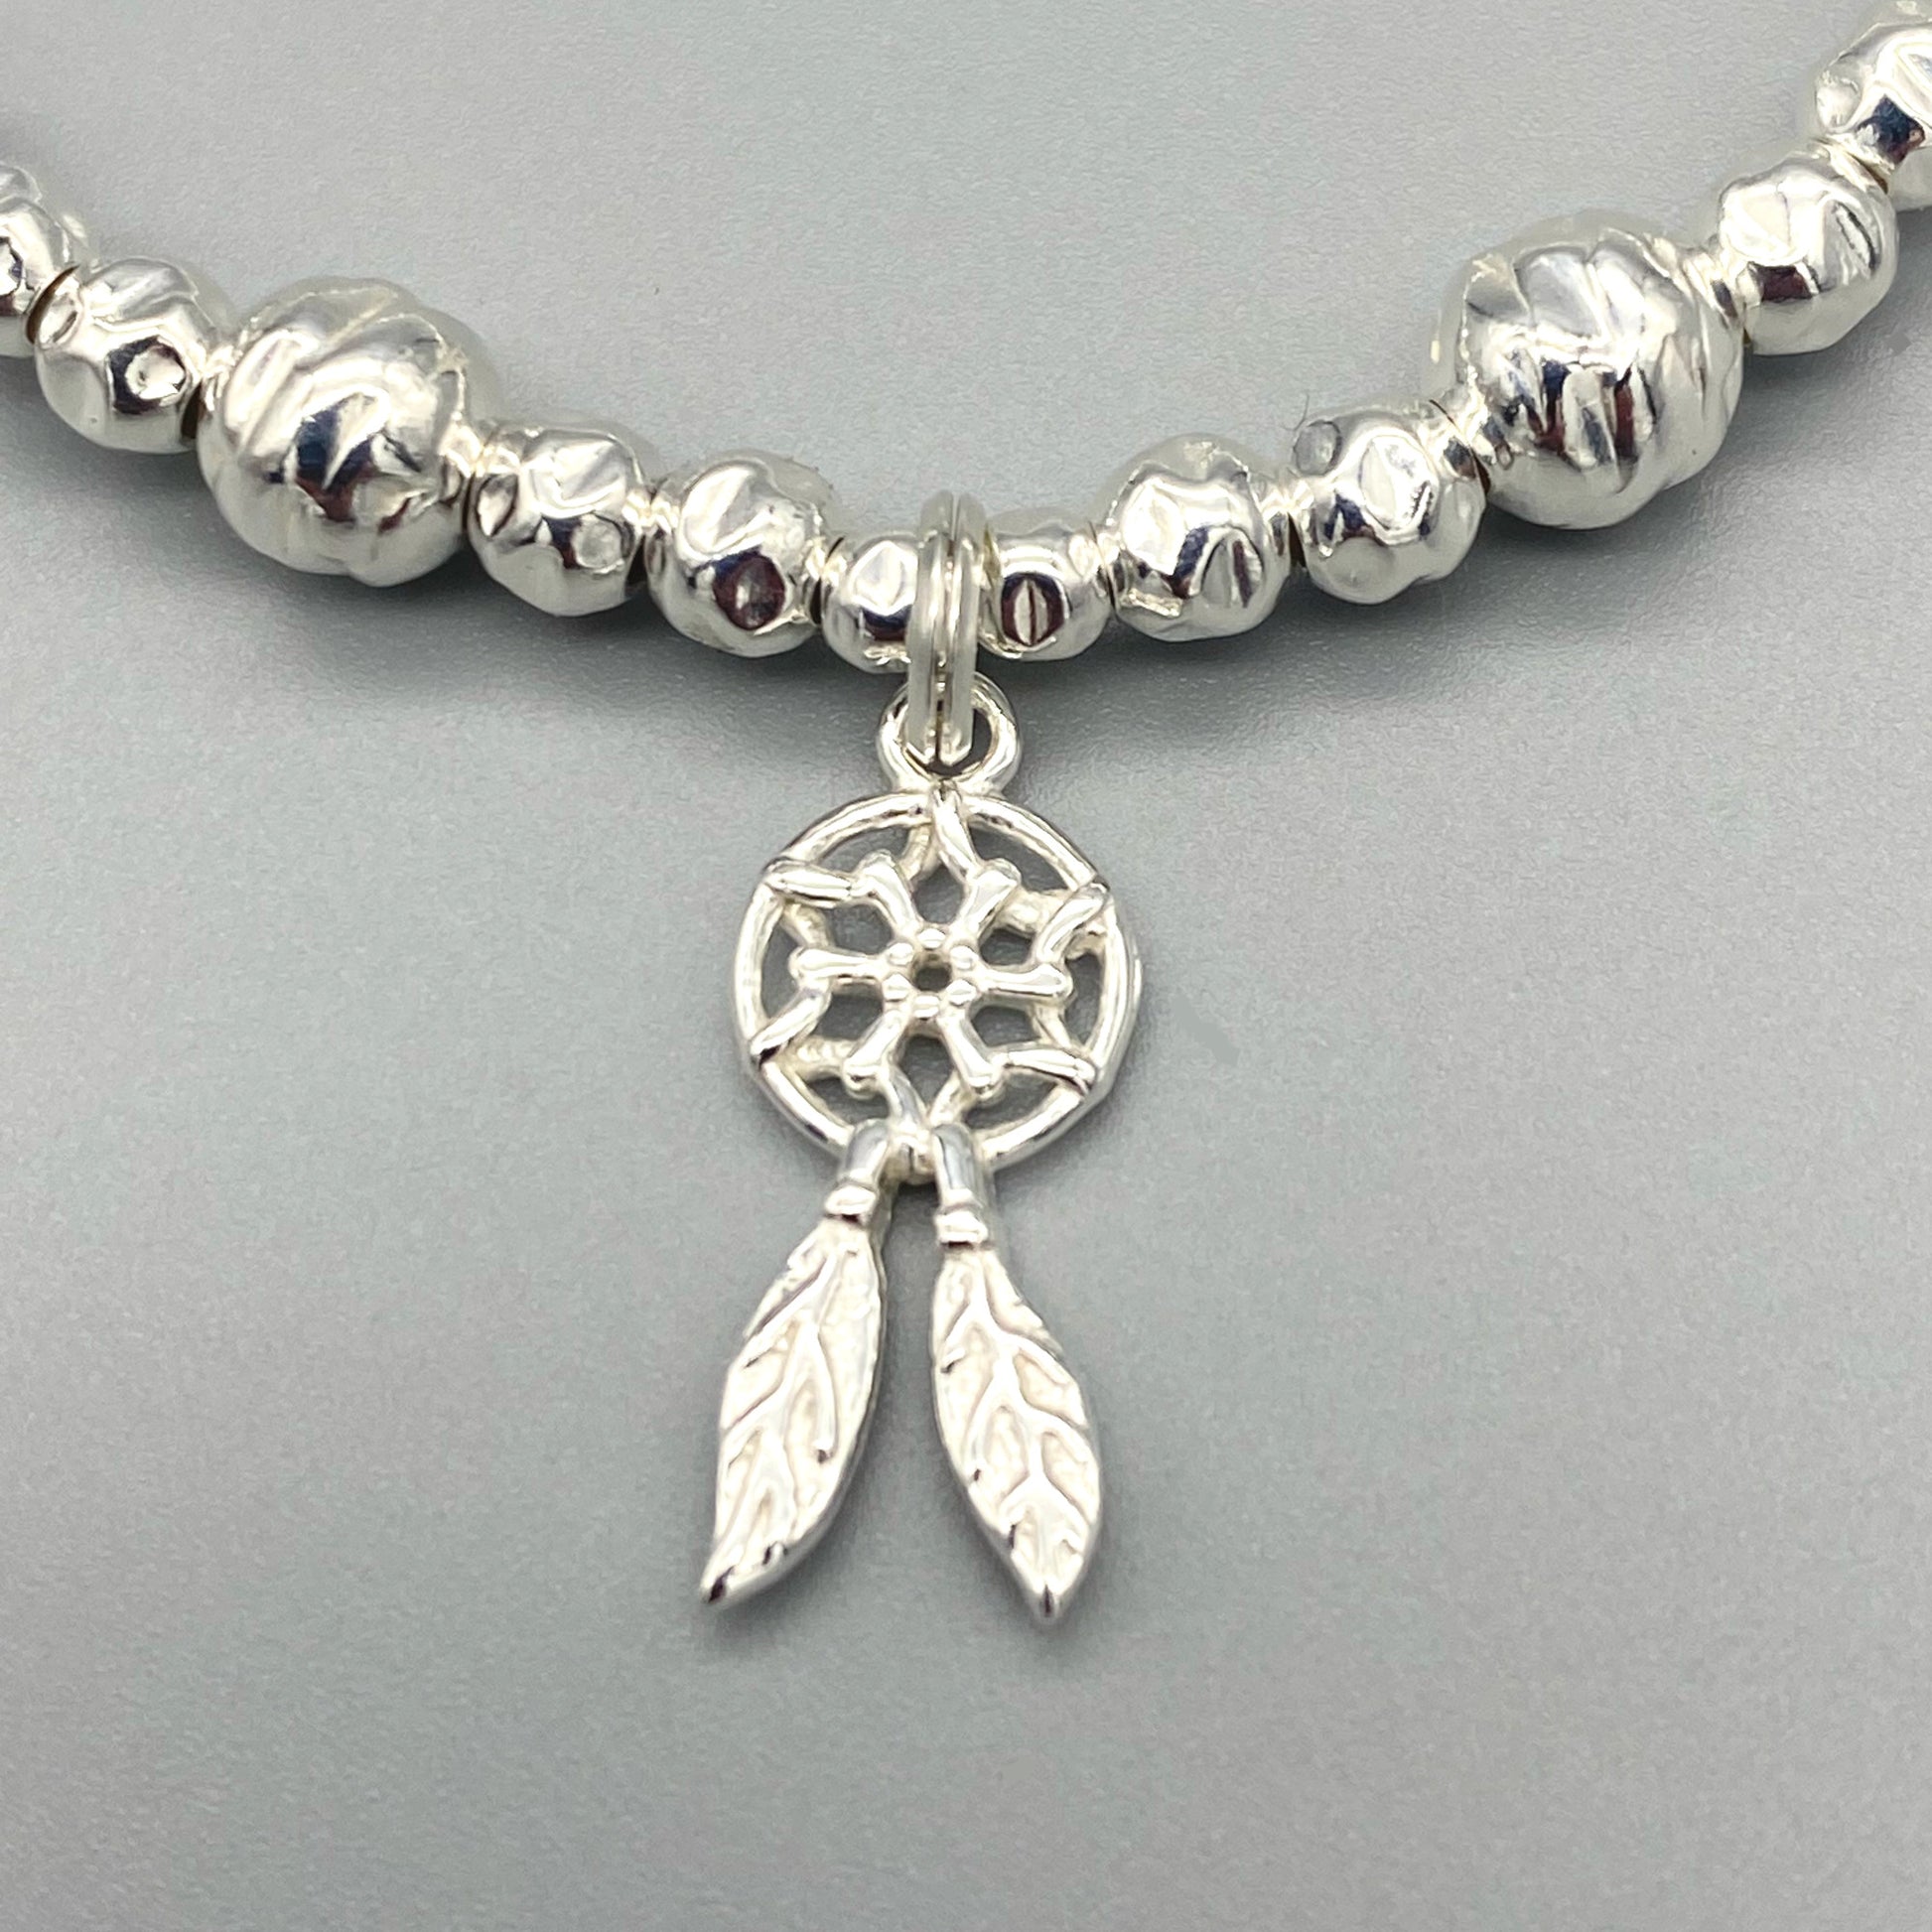 Closeup of Dreamcatcher charm sterling silver stacking bracelet for her by My Silver Wish